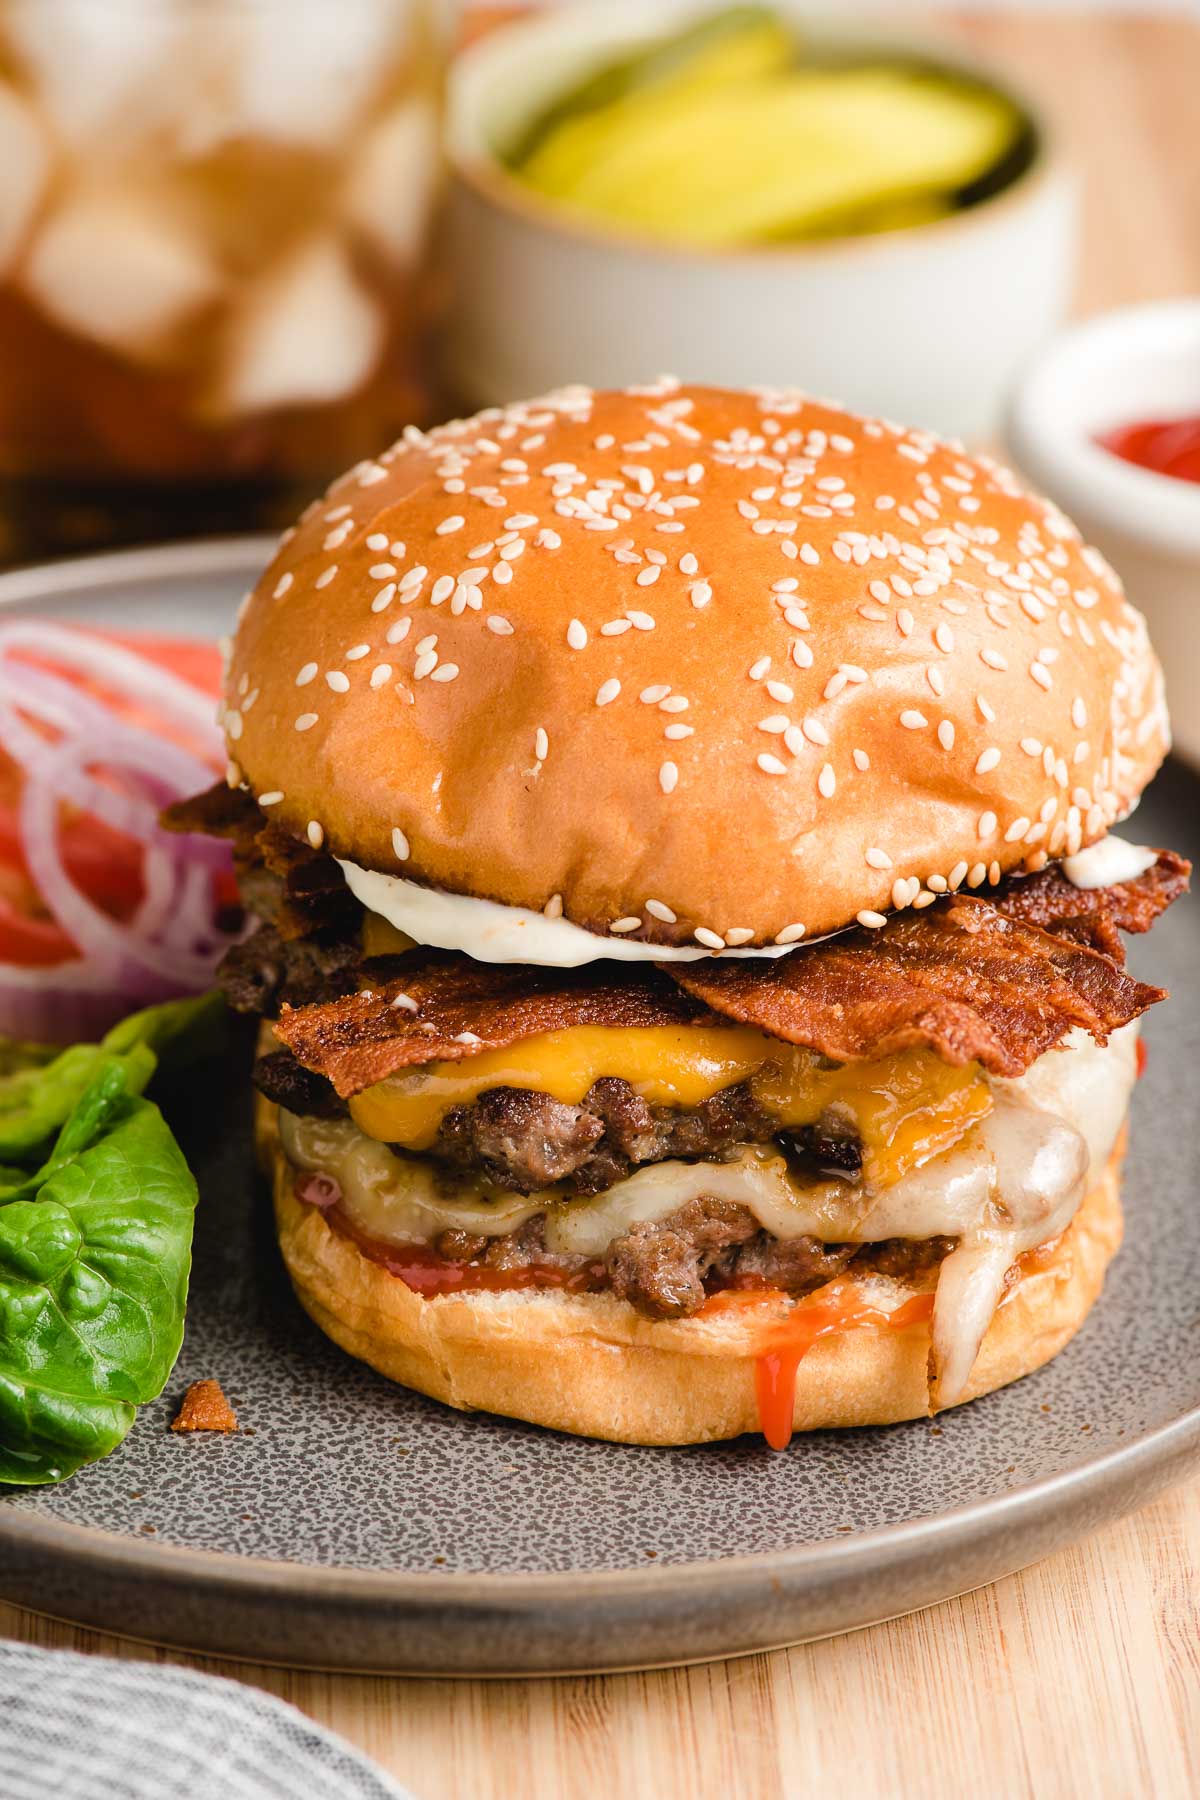 Double cheeseburger with bacon shown on a gray plate surrounded by toppings like lettuce, tomato, onion, and pickles.